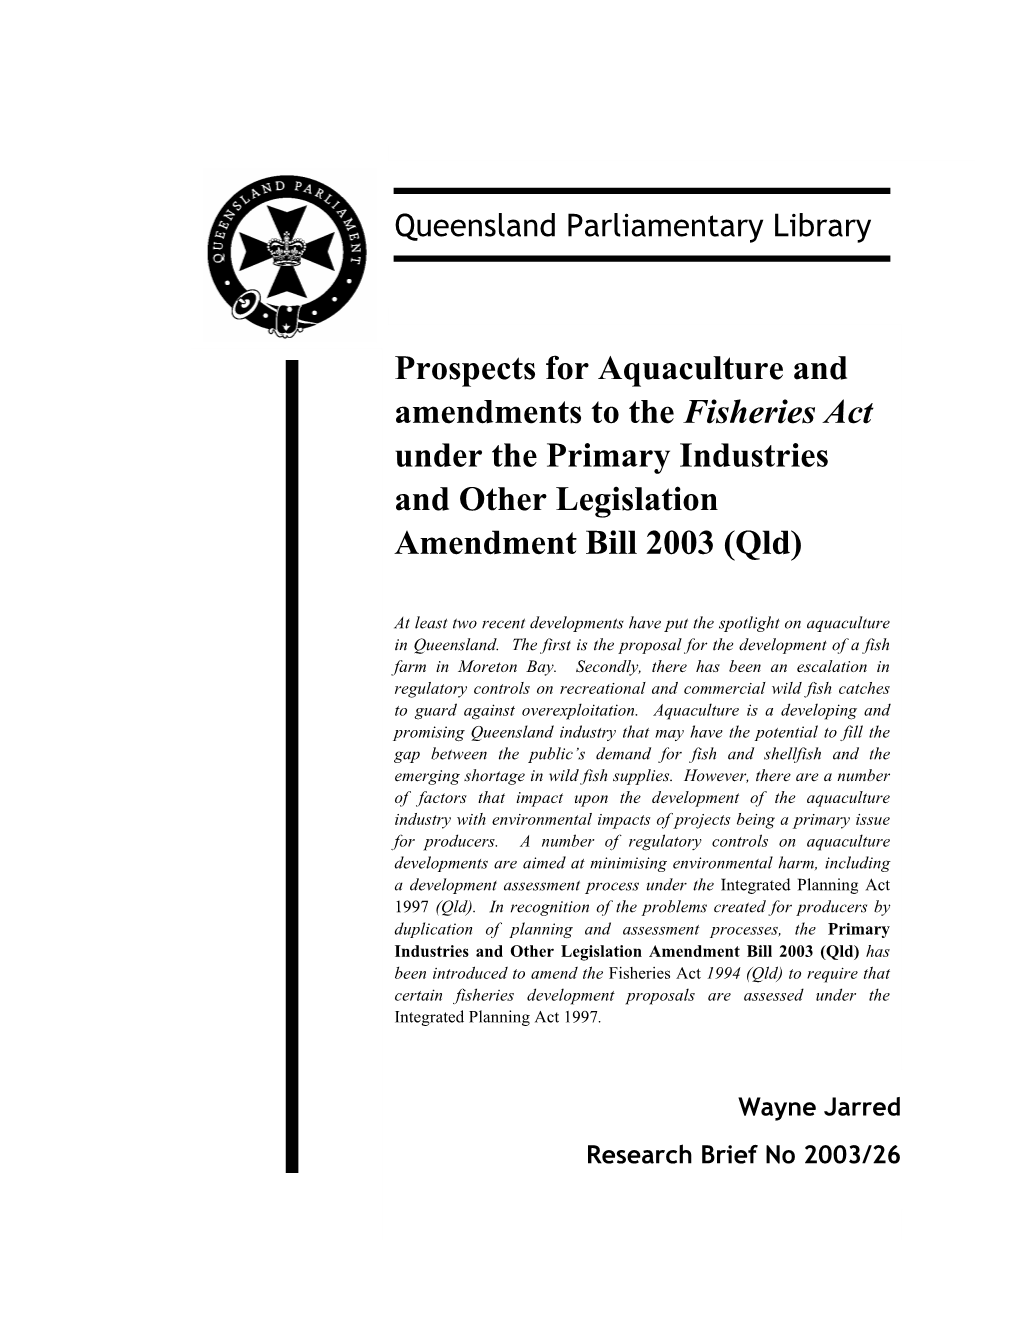 Prospects for Aquaculture and Amendments to the Fisheries Act Under the Primary Industries and Other Legislation Amendment Bill 2003 (Qld)